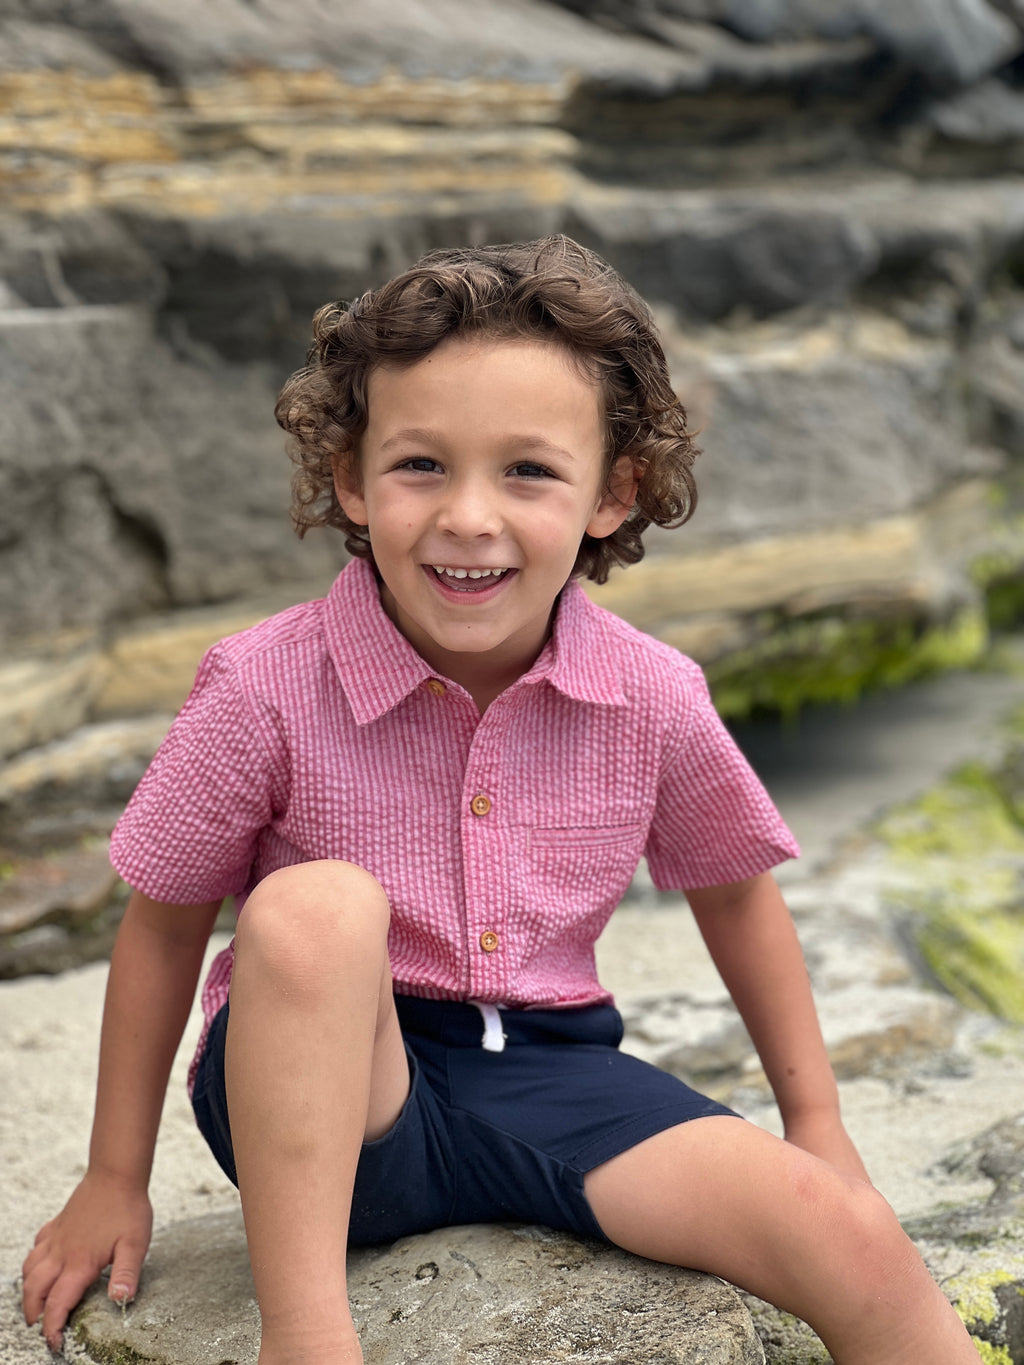 A boy with curly brown hair and brown eyes, wearing our Coral seersucker woven shirt and navy twill shorts sitting on a big rock at the beach